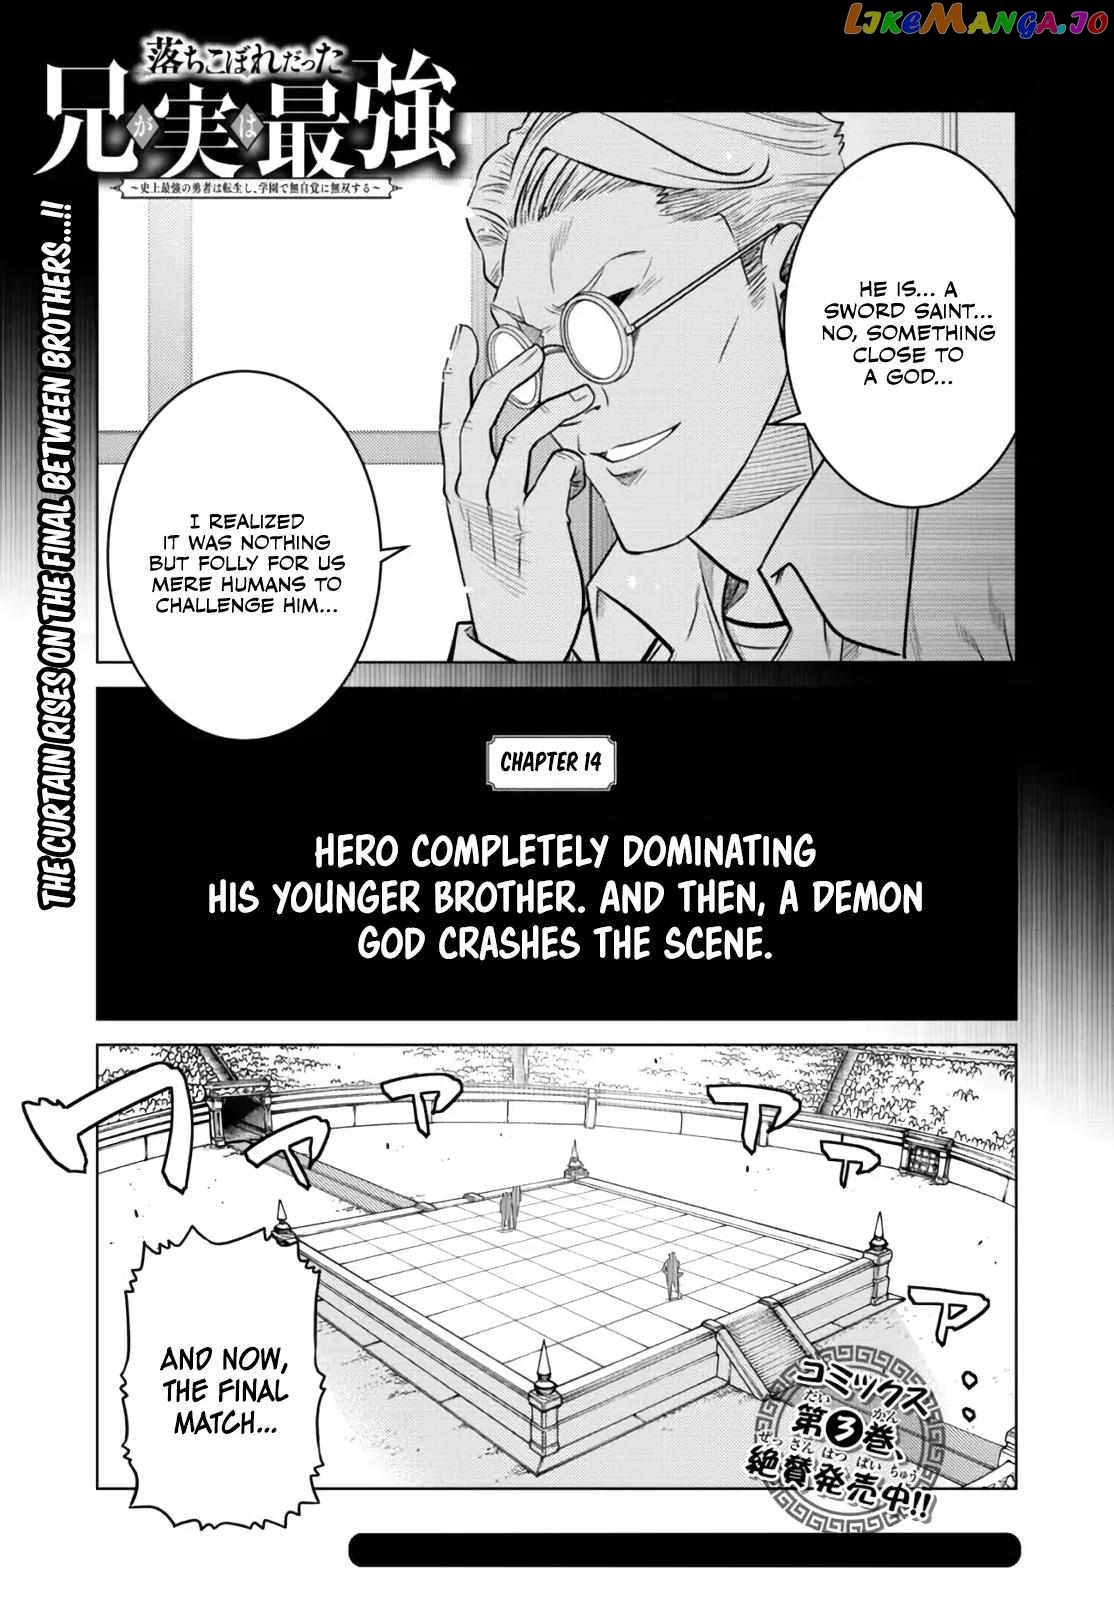 The Fallen Brother Is Actually The Strongest The Strongest Hero In History Is Reincarnated And Unknowingly Unmatched At The School chapter 14 - page 4